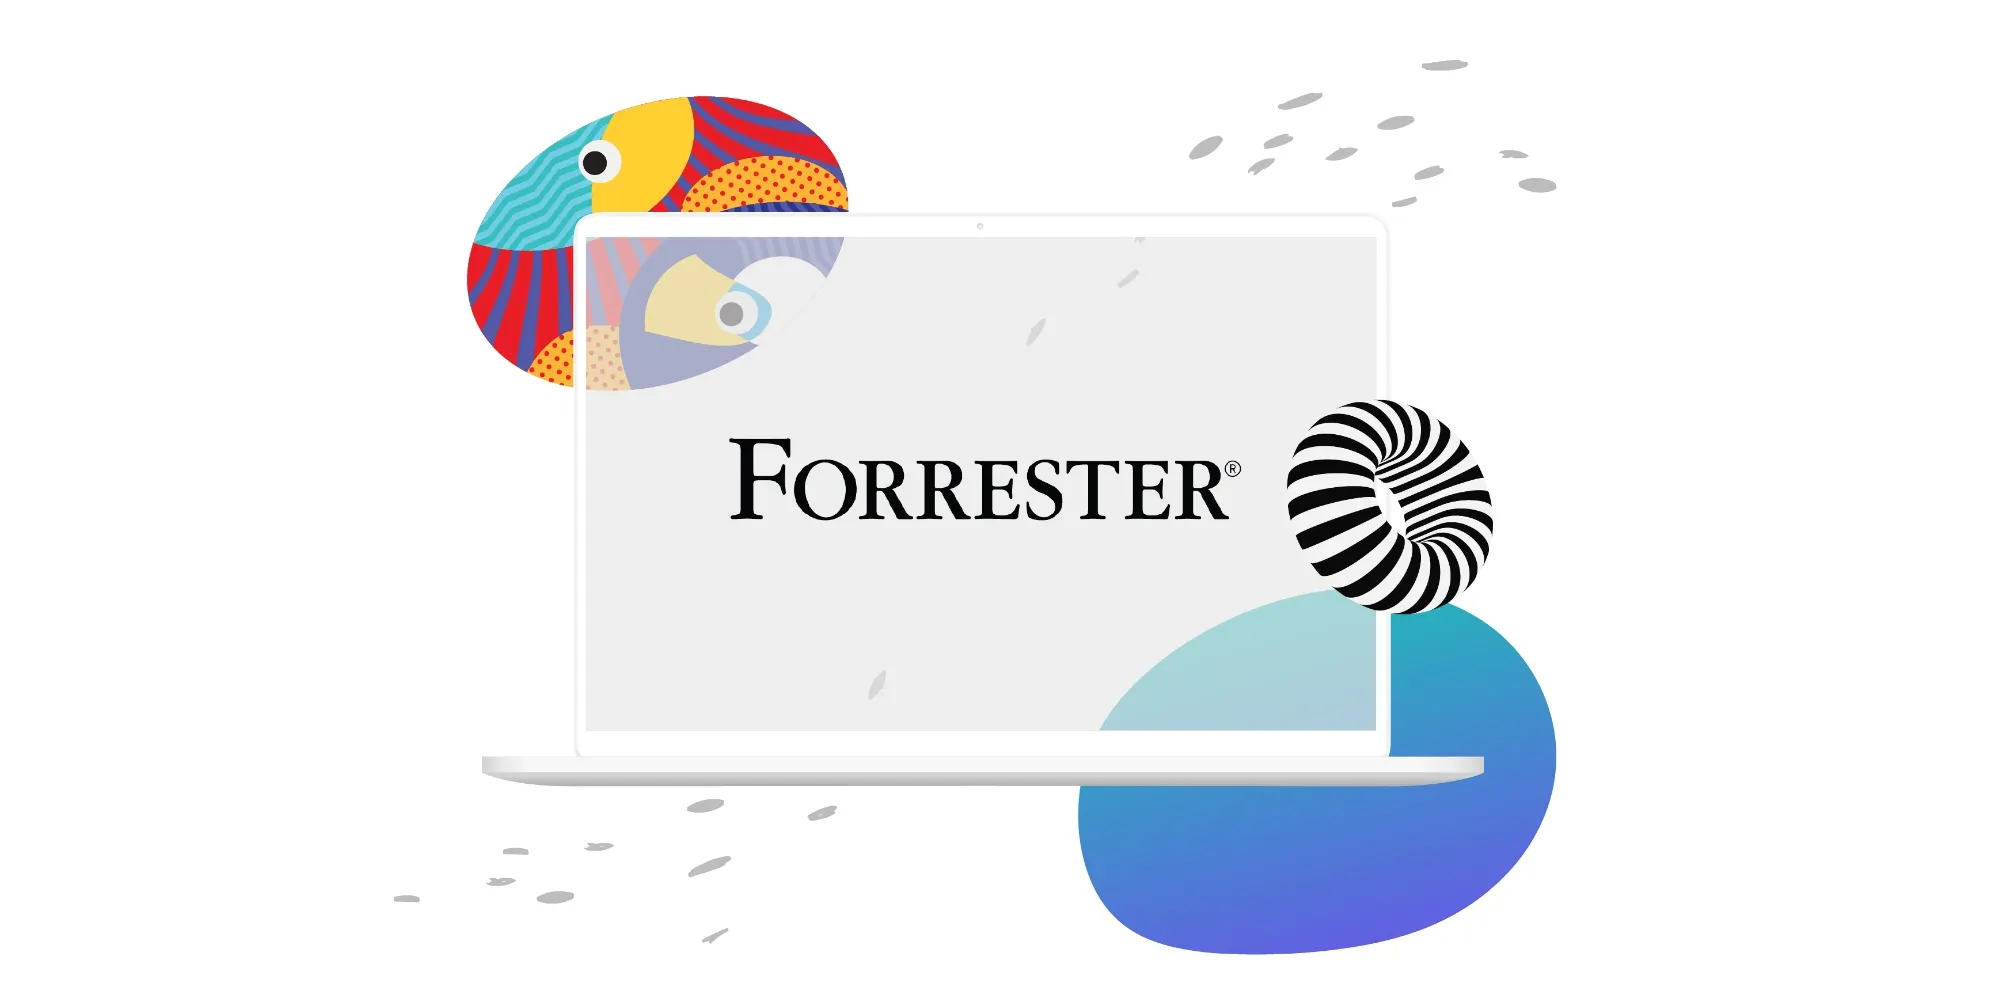 "Forrester" with abstract art surrounding the word. 